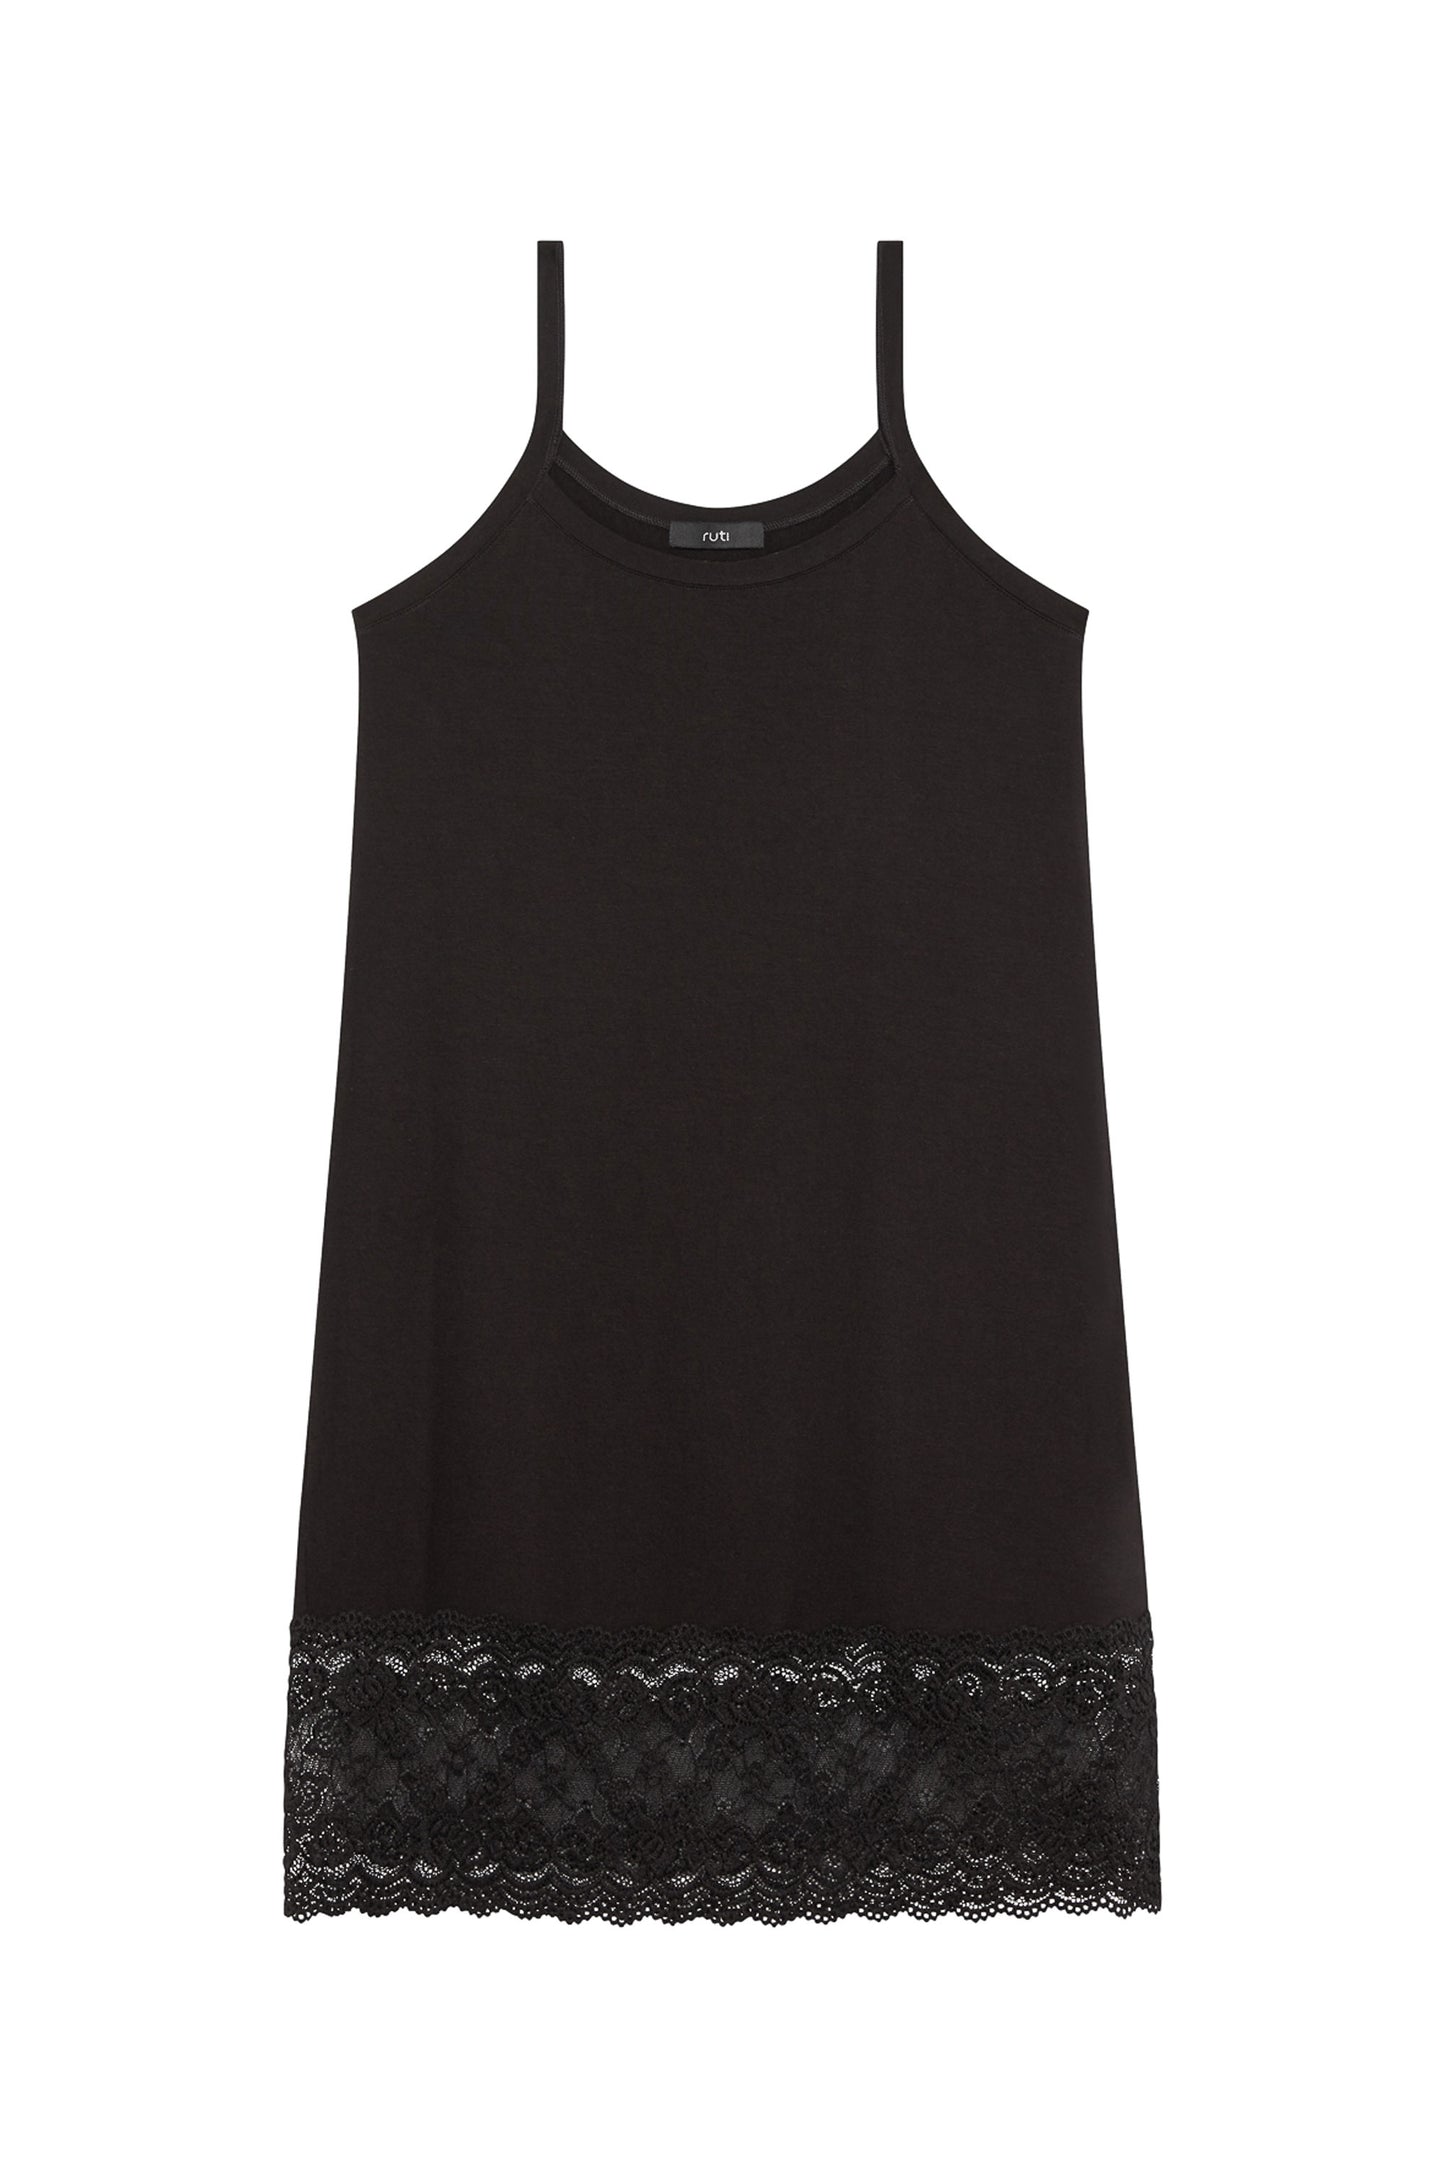 The Statement Lace Cami